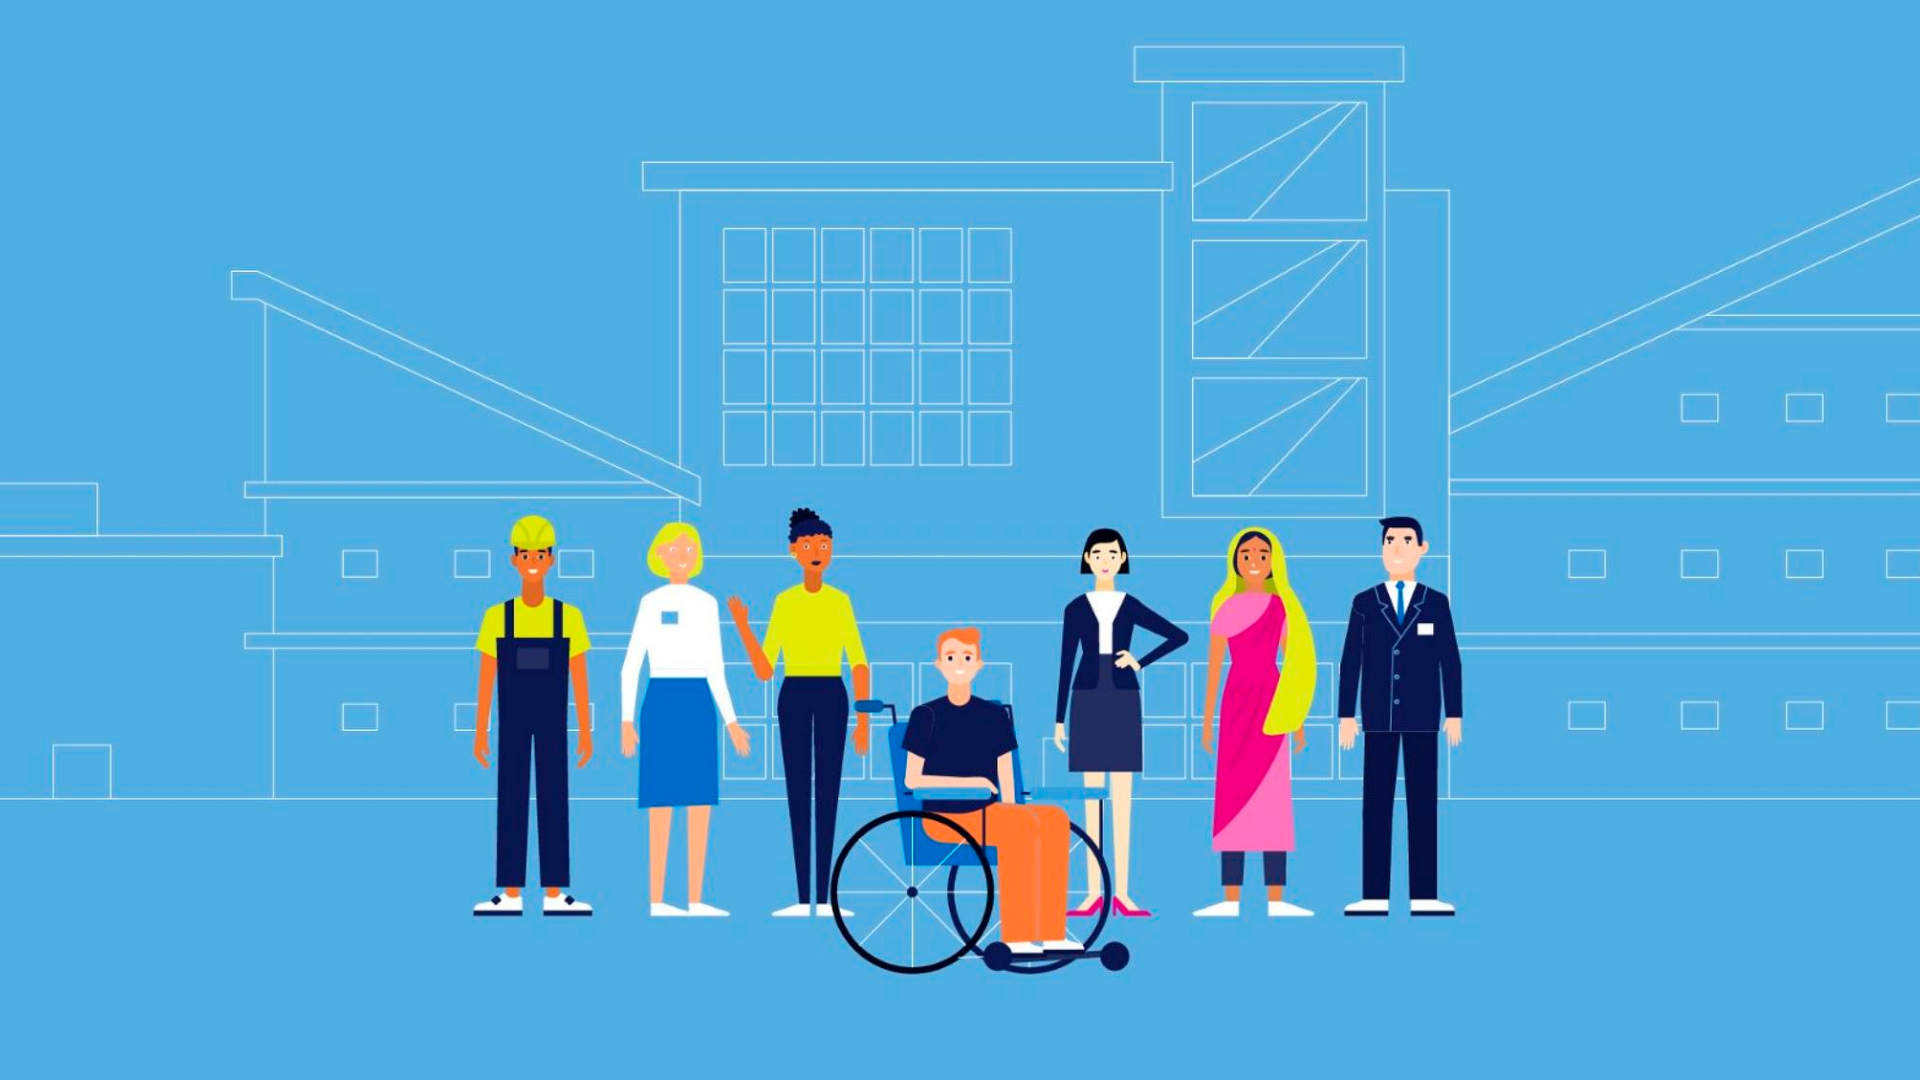 Corporate Animated Video "We are so different, but equal!"